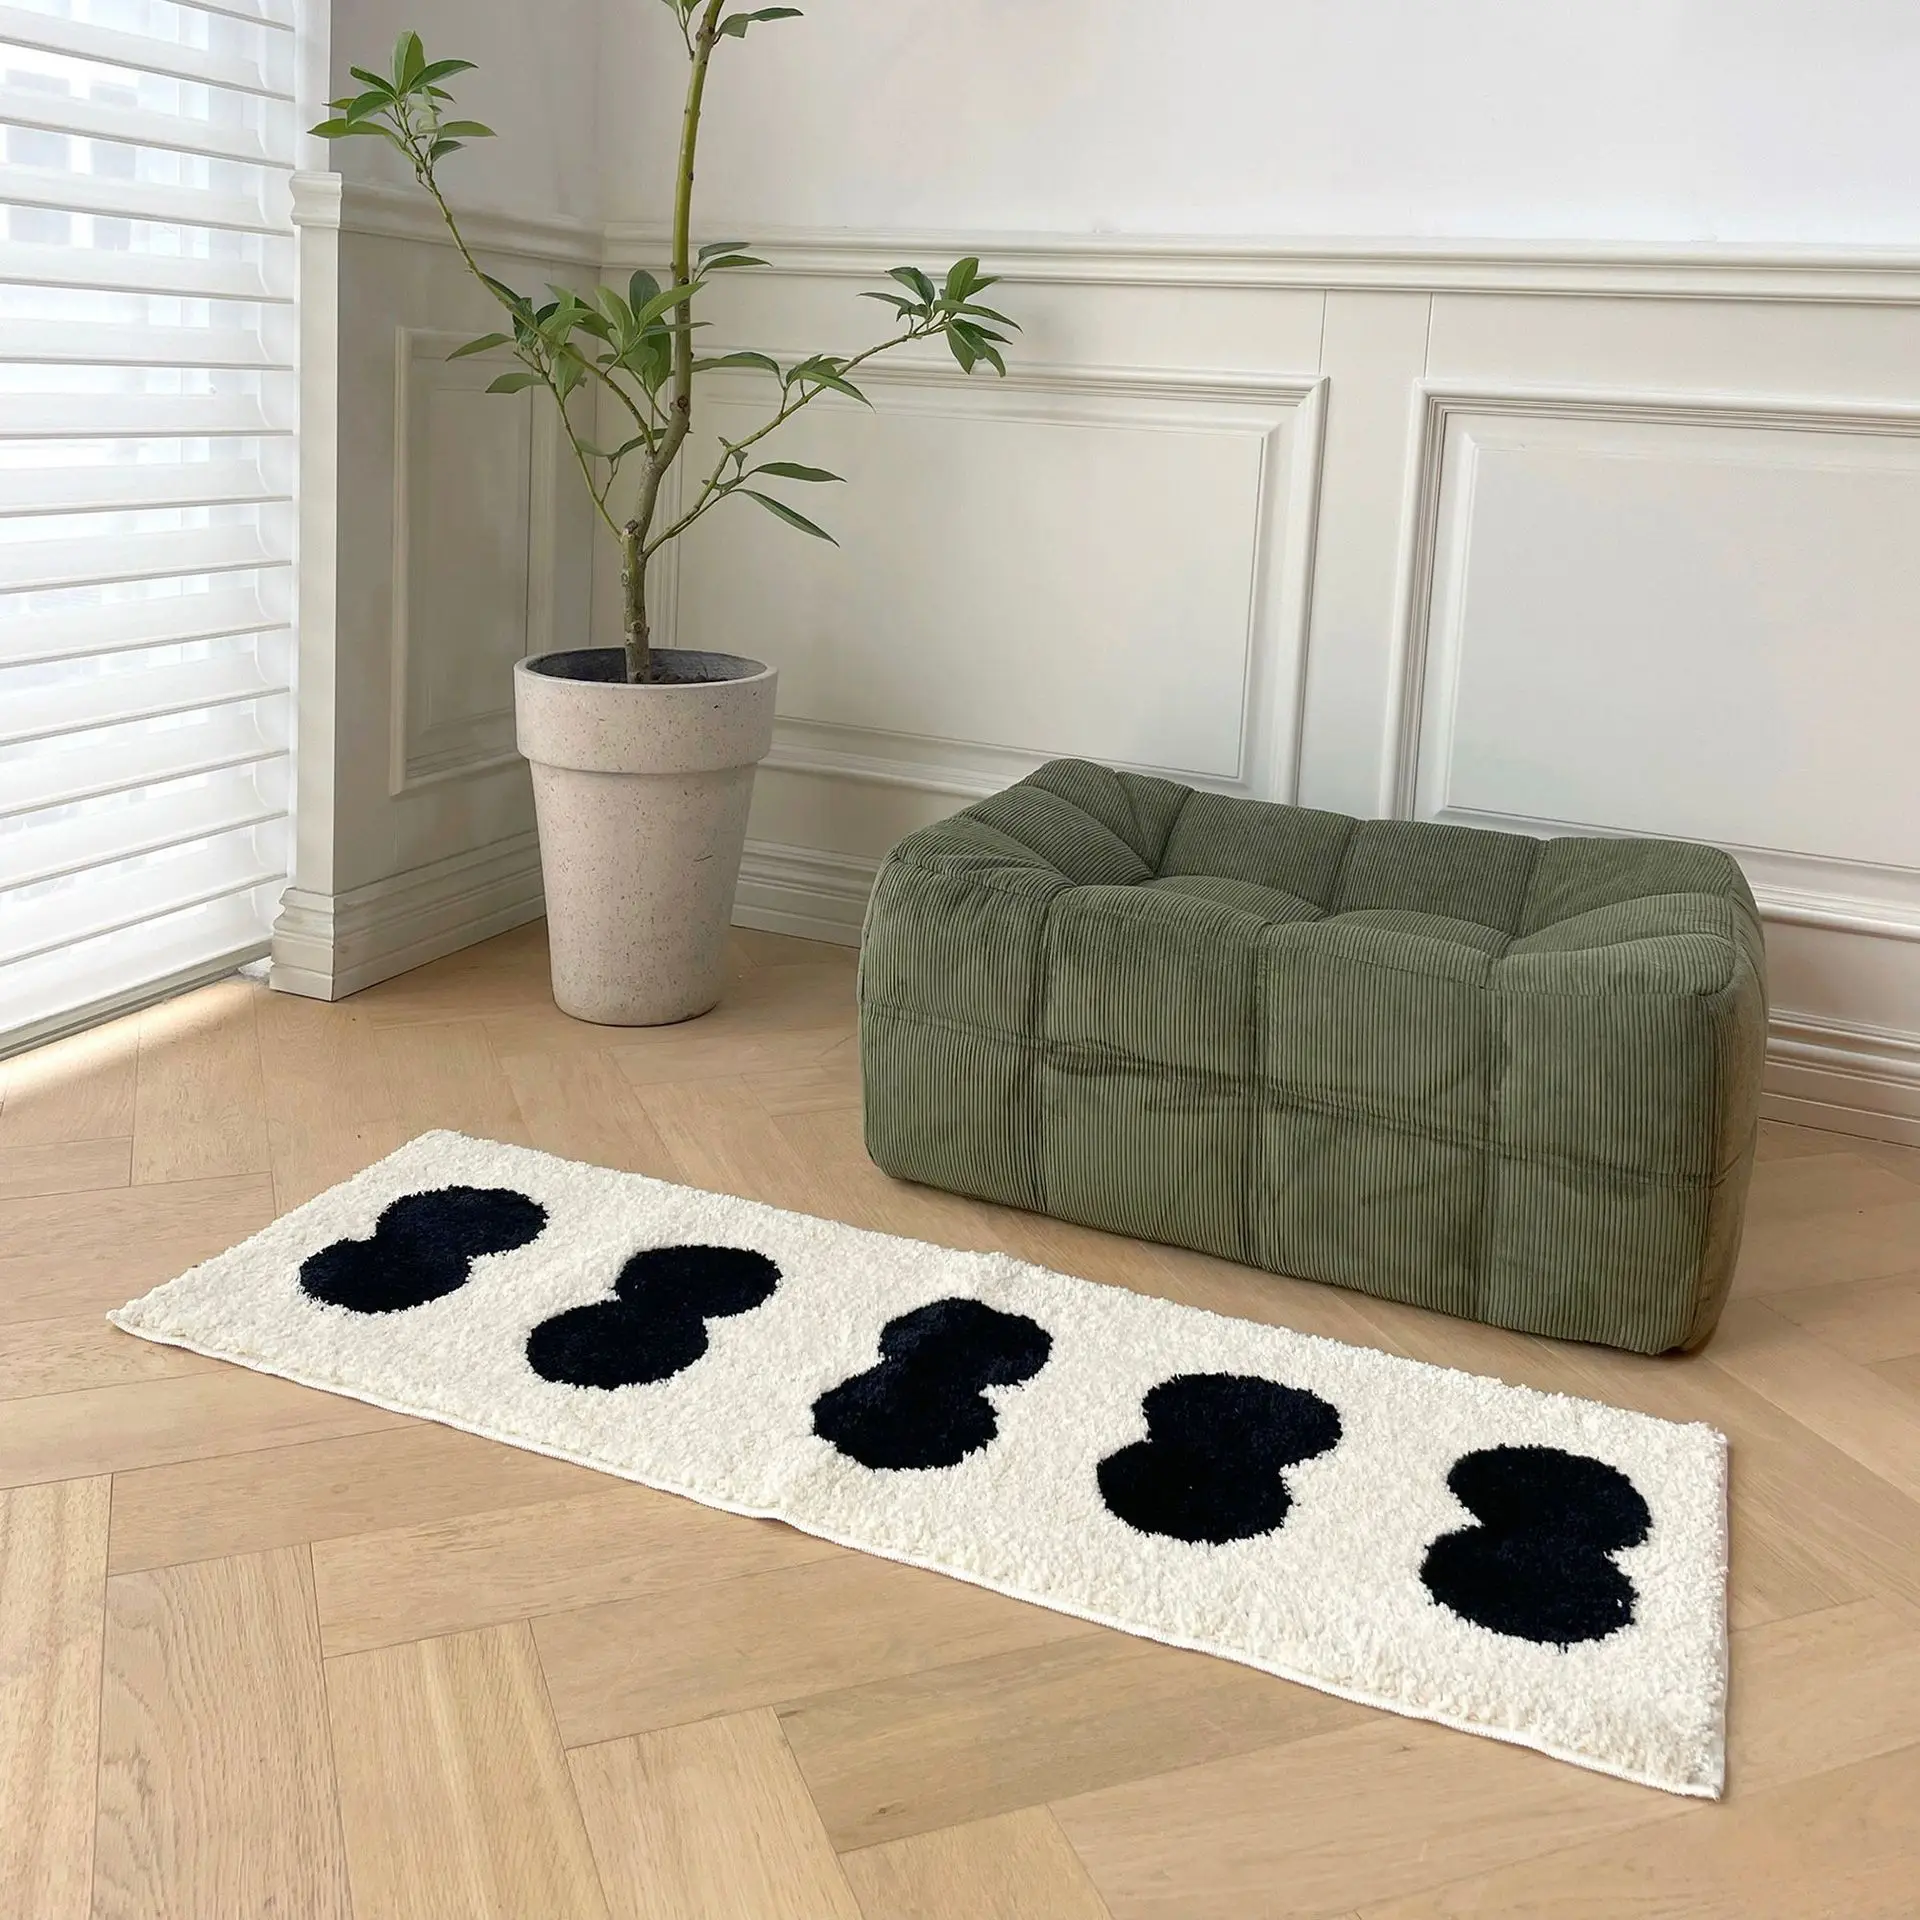 

Top Quality Tufting Black White Rug Soft Fluffy Bedside Bedroom Carpet Plushy Area Floor Pad Doormat Aesthetic Home Room Decor